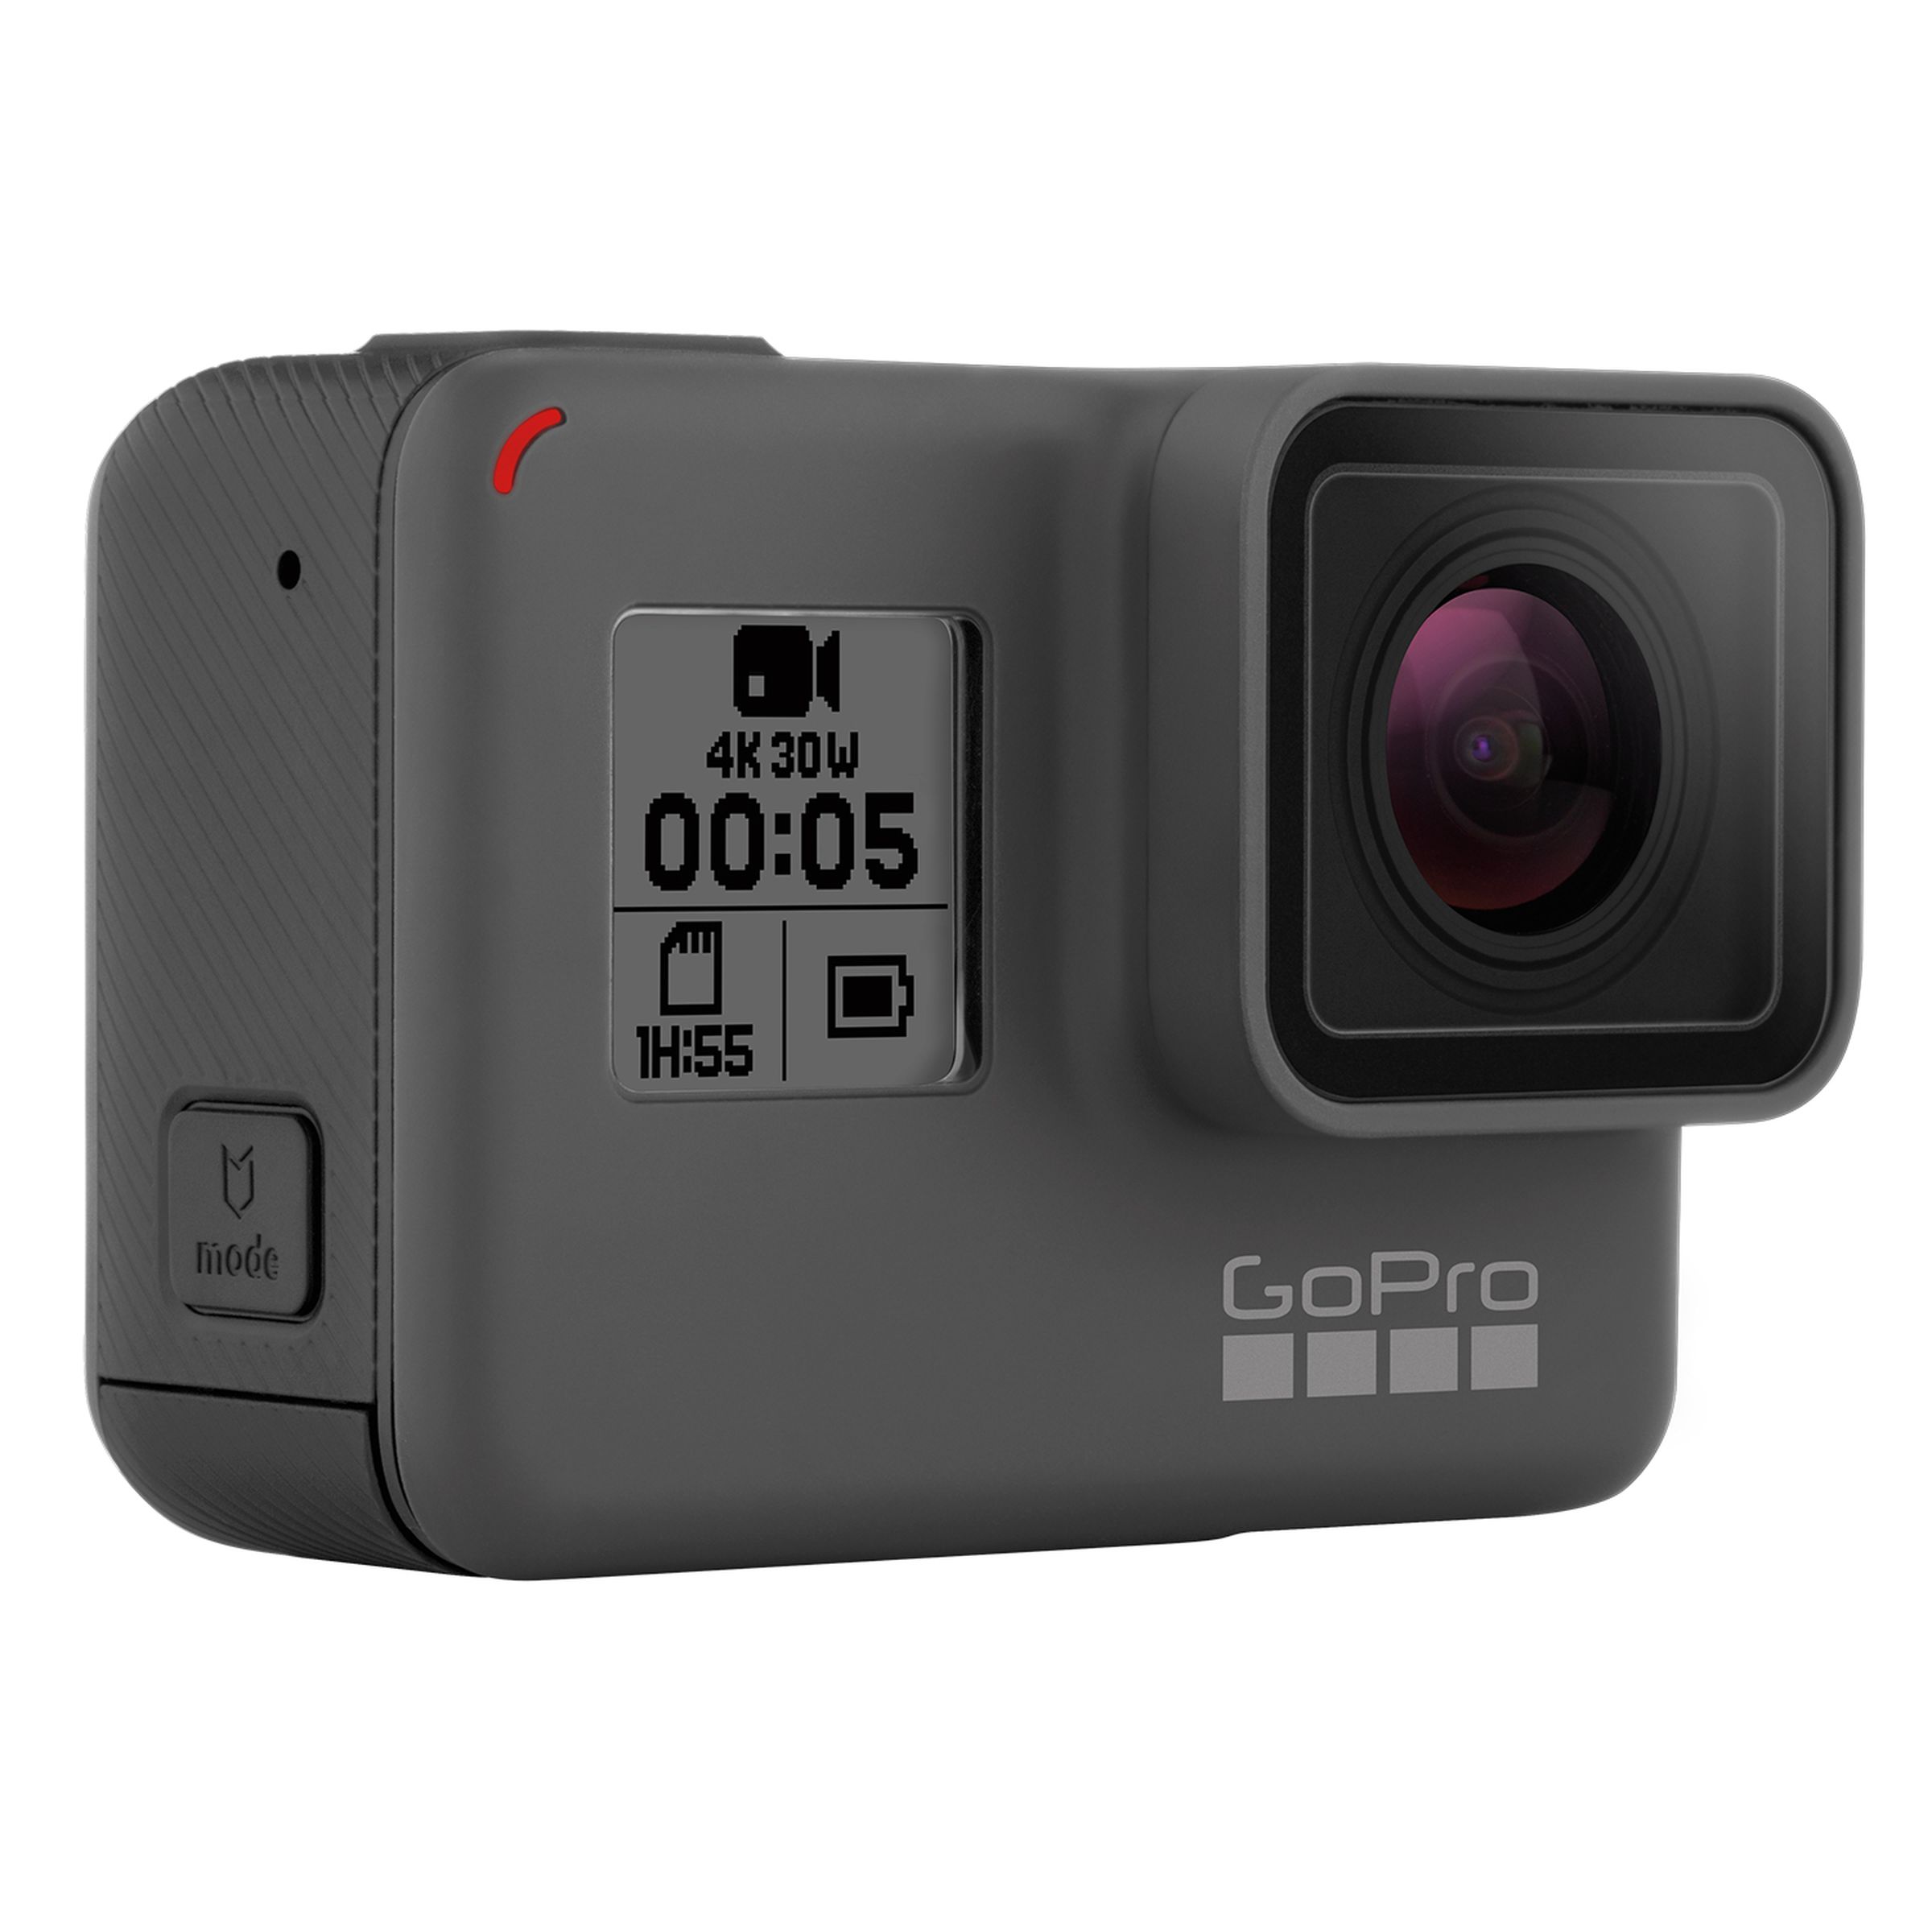 GoPro Hero 5 Black and Hero 5 Session in photos